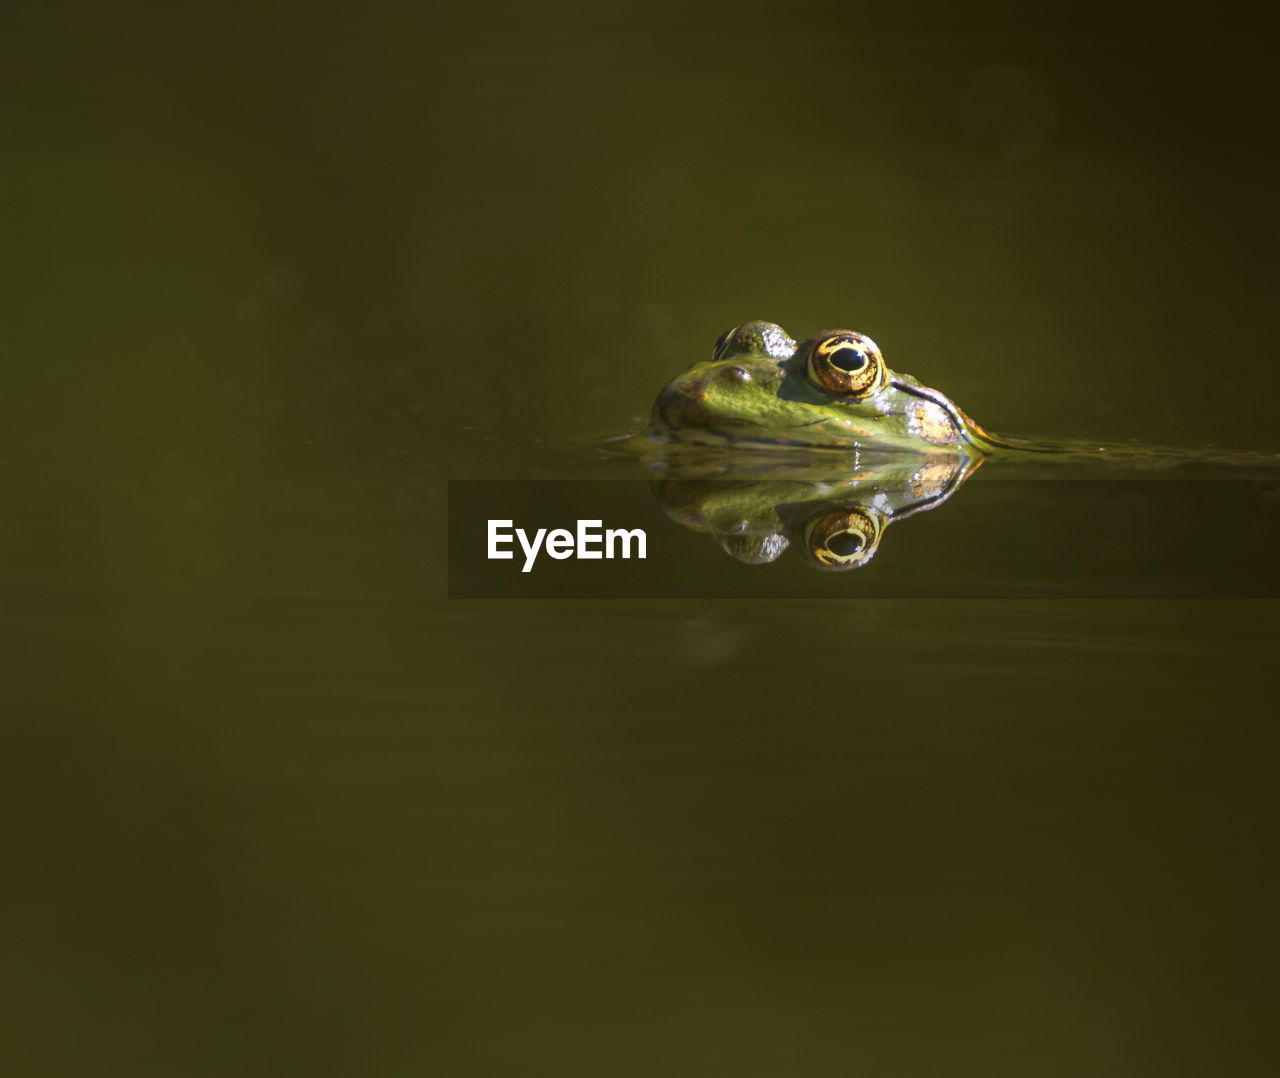 Eyes of a frog swimming in the pond